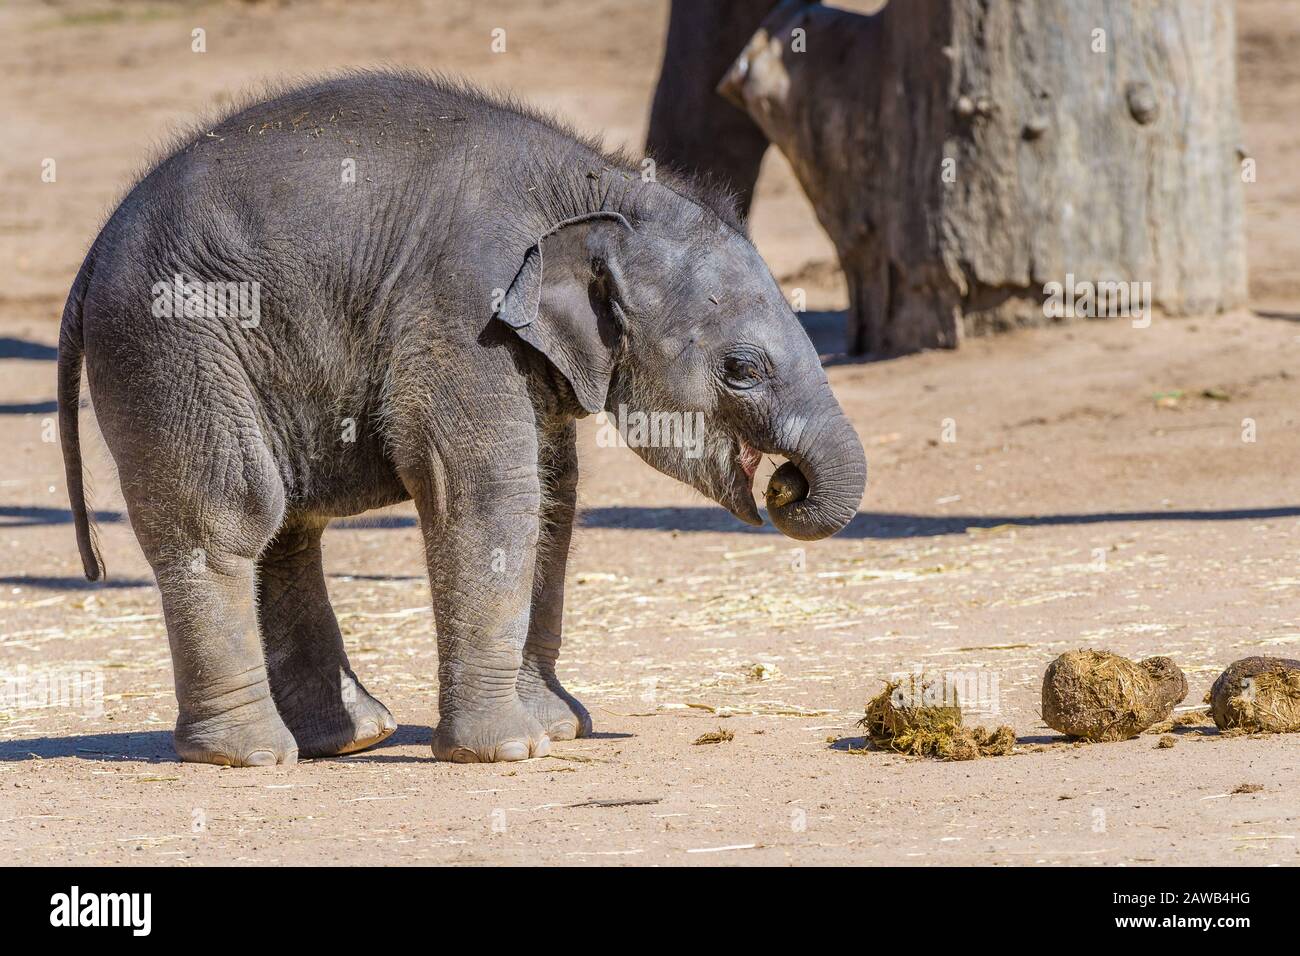 Australia's Dubbo Zoo's newest asiatic, elephant calf eating its mother's faeces to improve gut function, health and resistance. Stock Photo